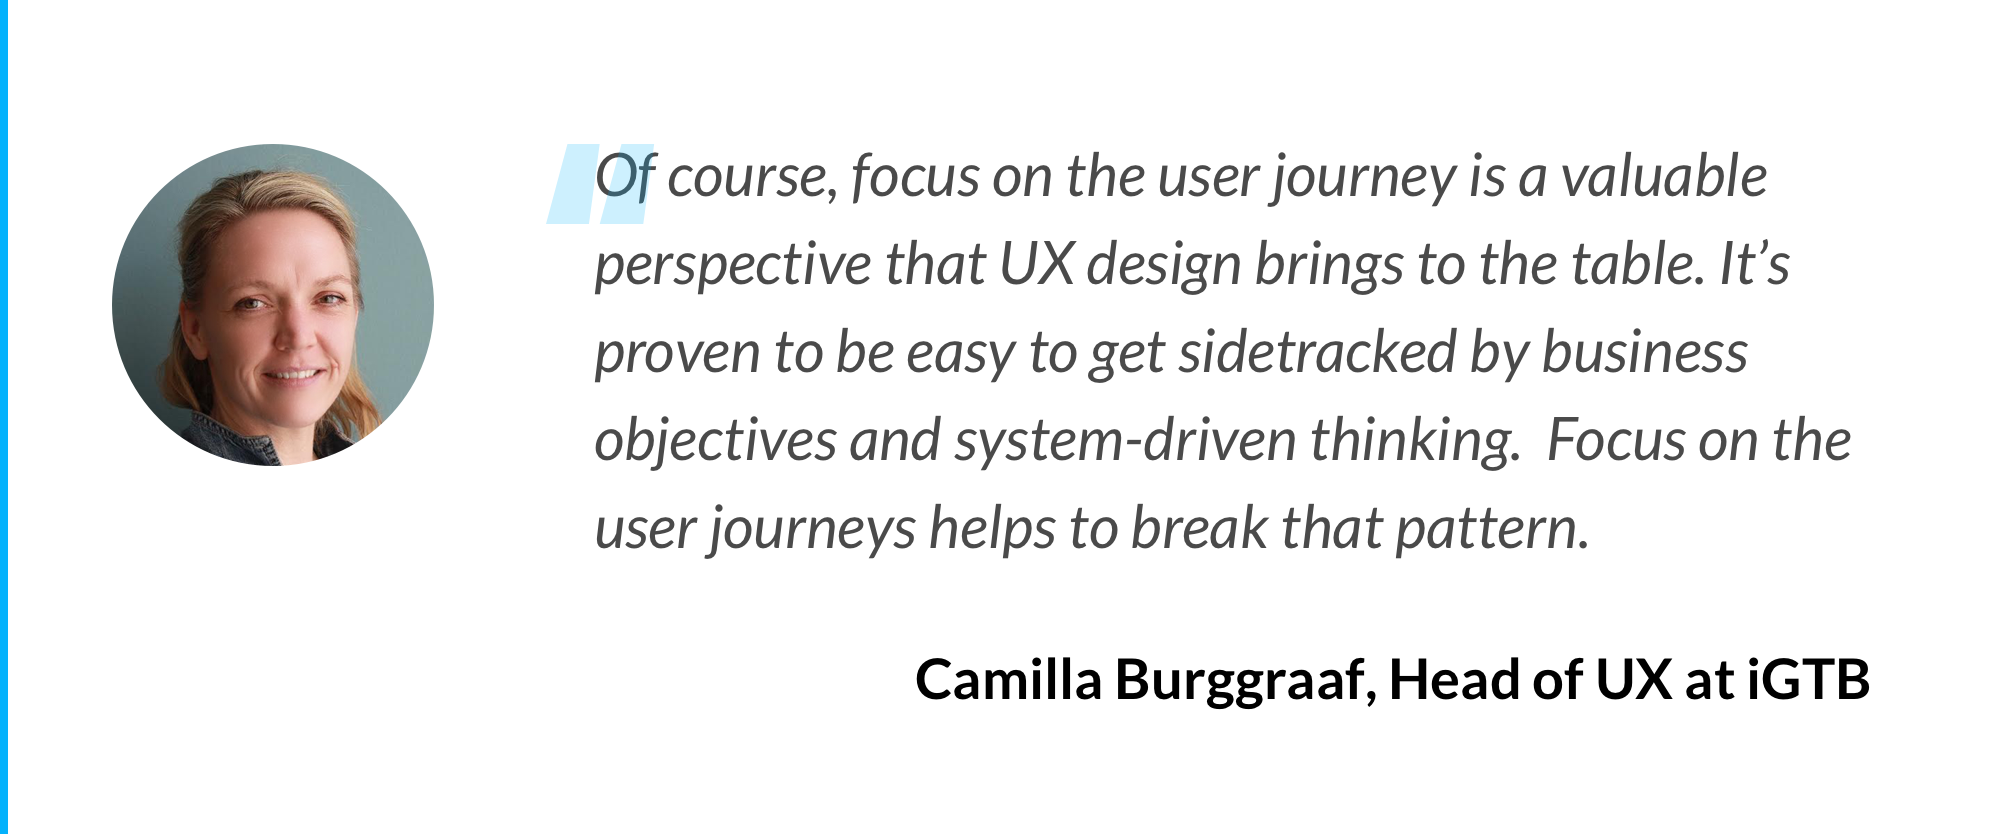 igtb-case-study-quote-camilla-burggraaf-1-at-2x.png